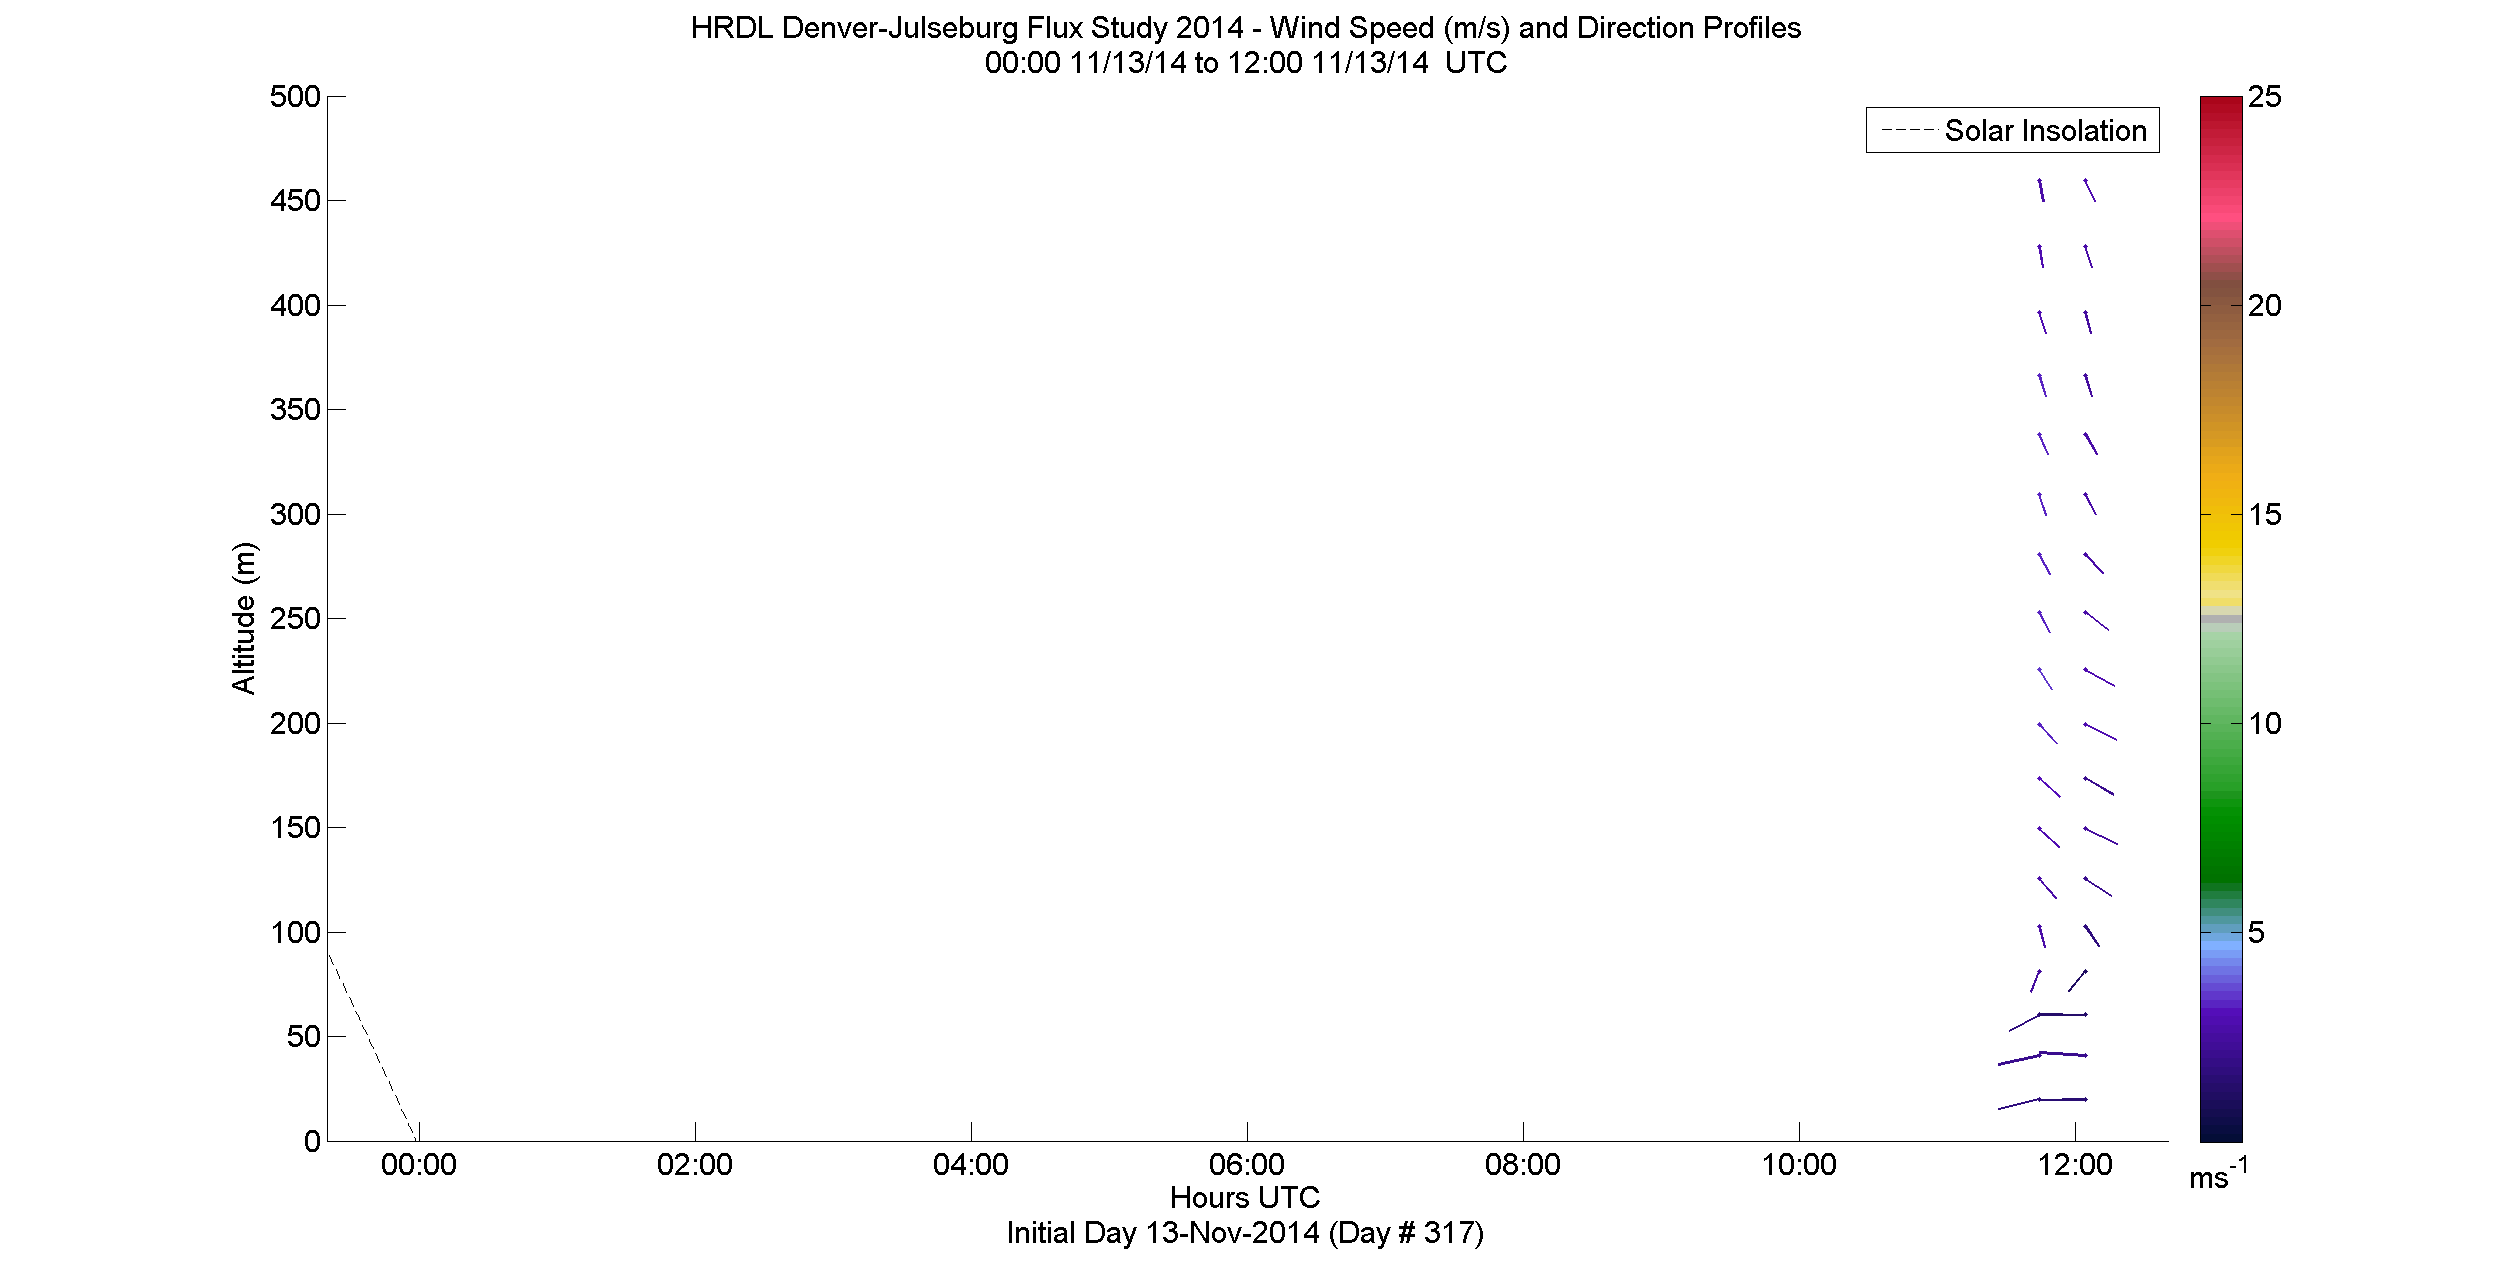 HRDL speed and direction profile - November 13 am